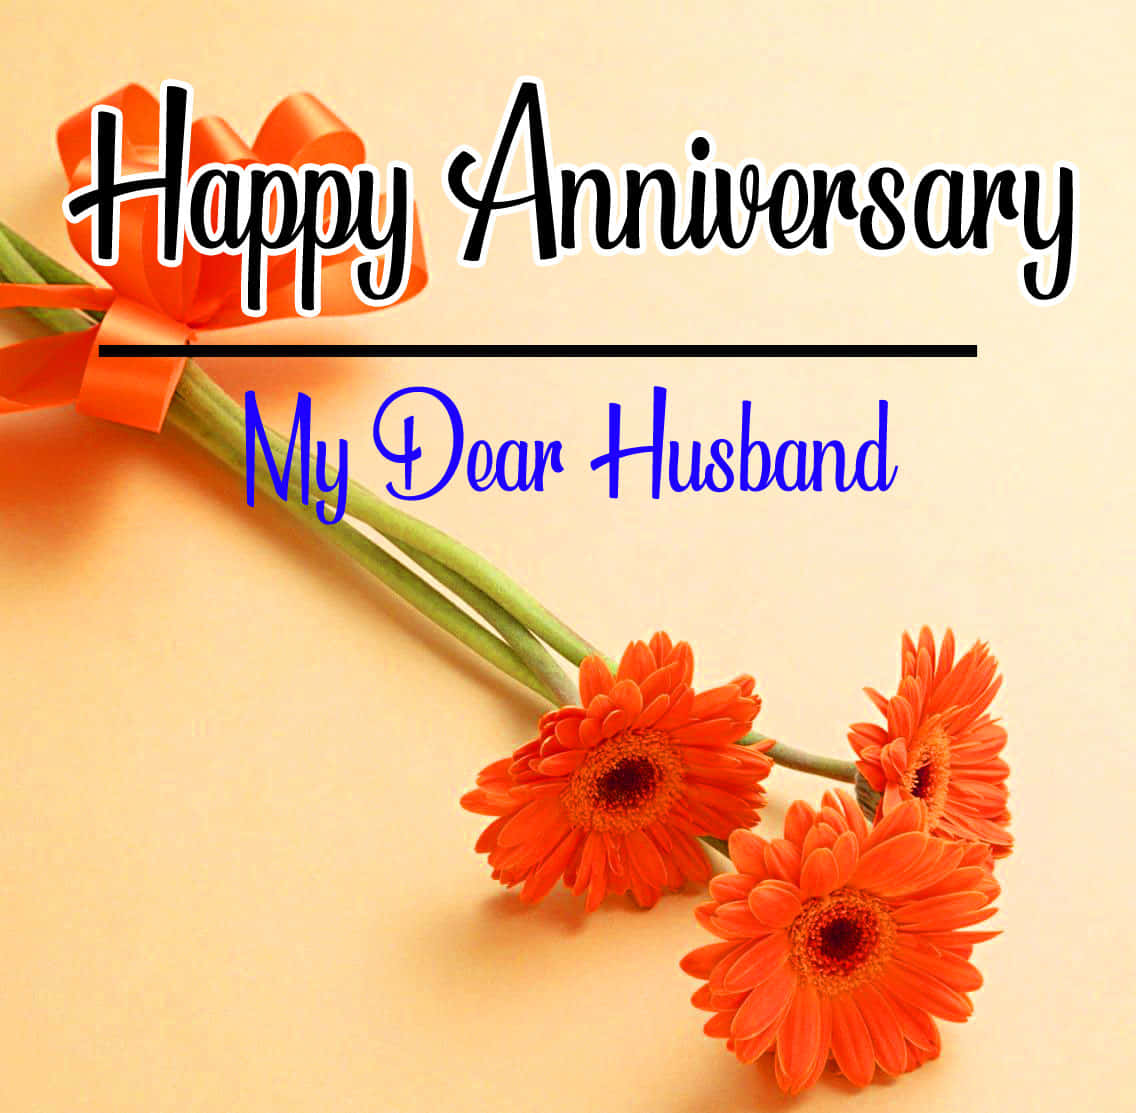 Anniversary Message To The Husband Background